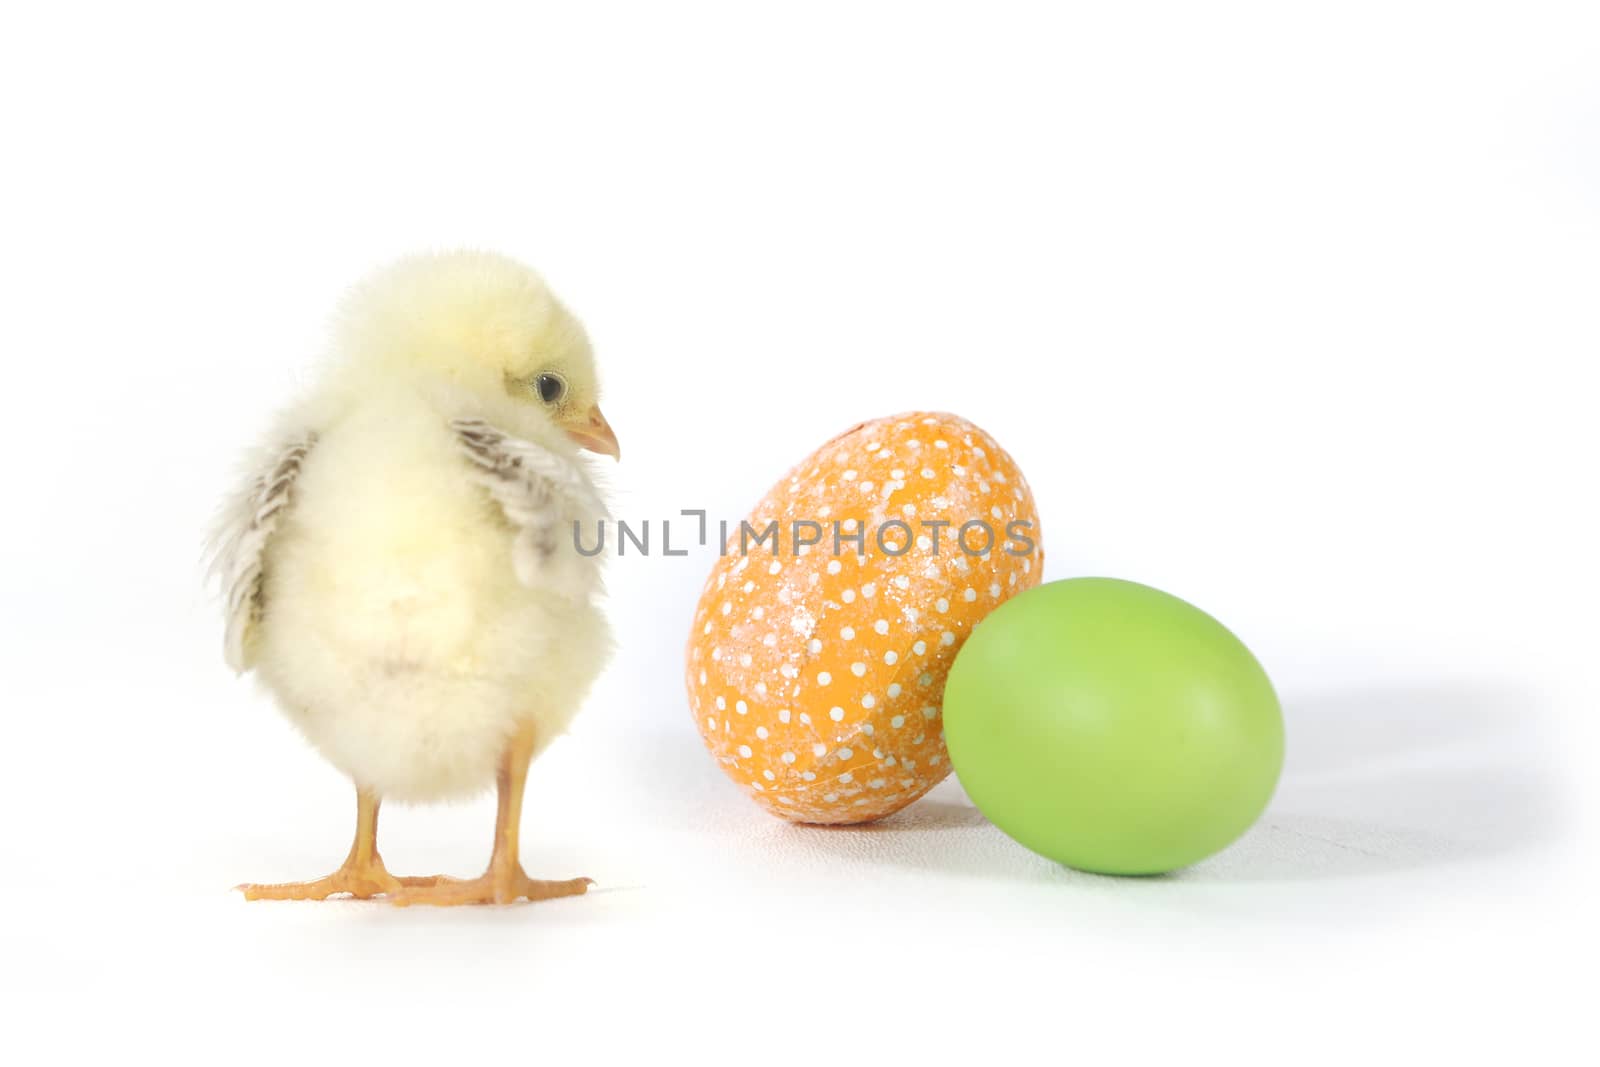 Easter Themed Image With Baby Chicks and Eggs